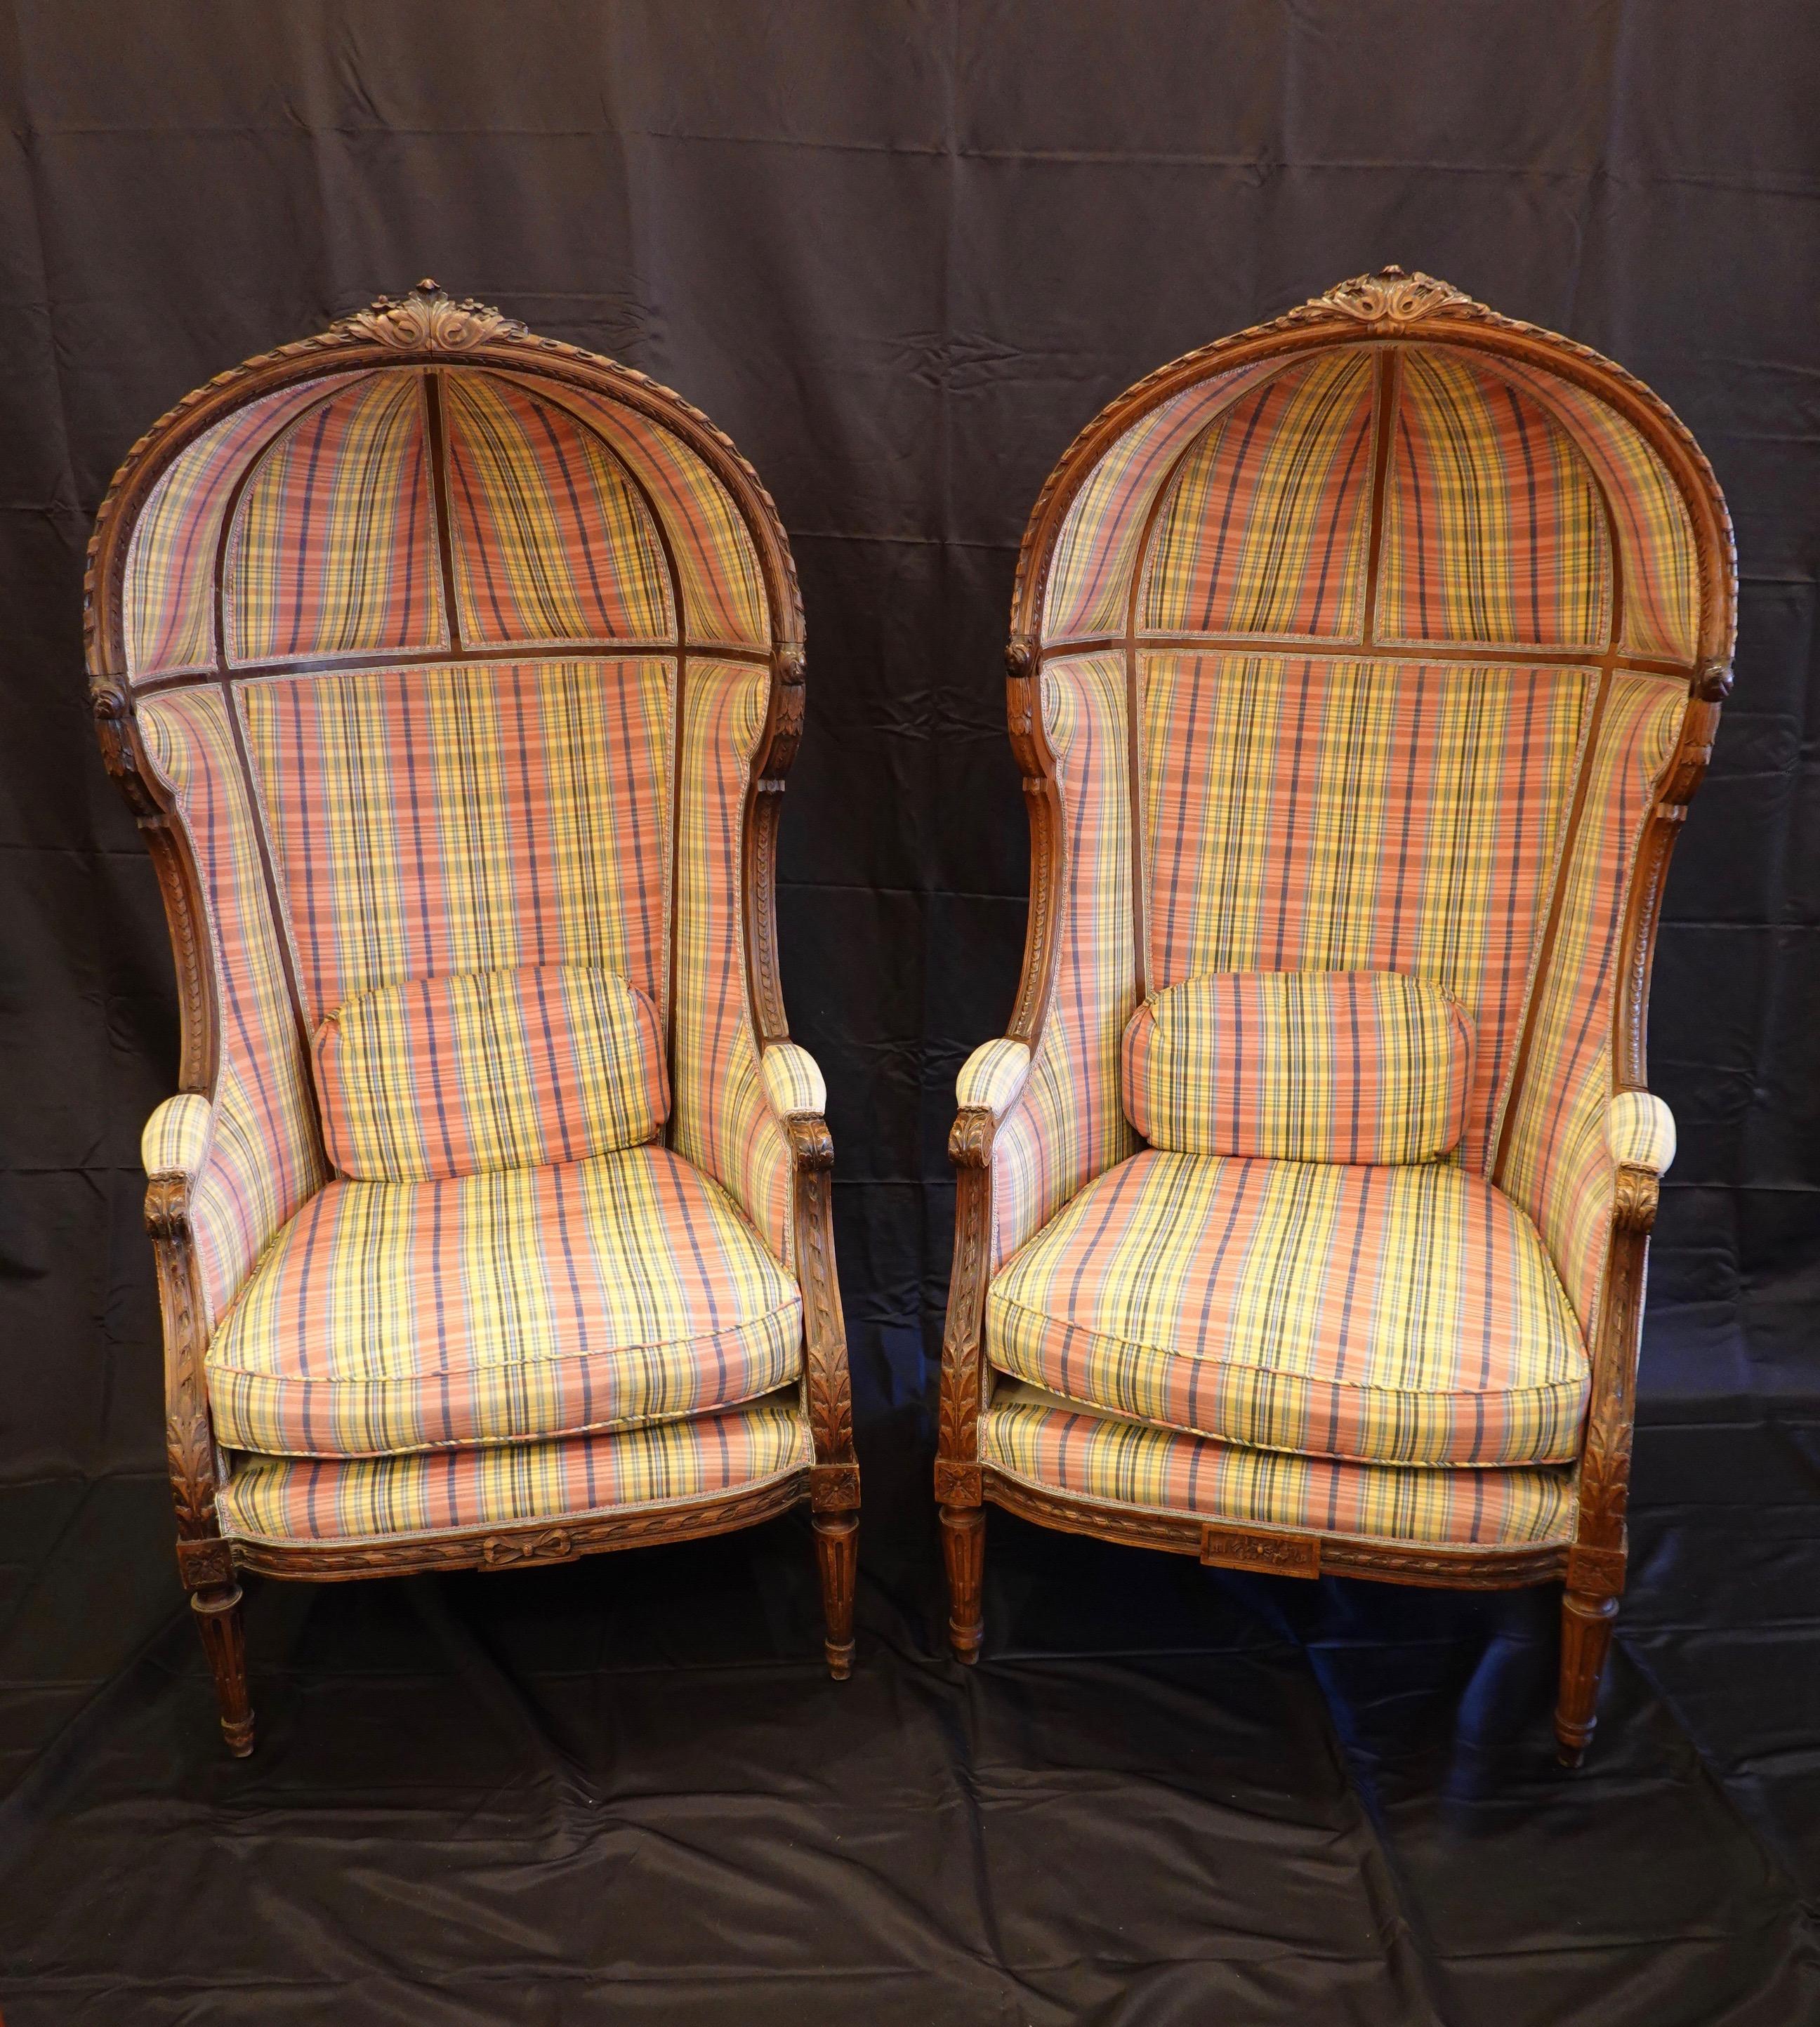 Pair of walnut Porter chairs in the Louis XVI style featuring hand carved acanthus leaves on the crest rail and arms, tapered legs with cabled fluting, central bow on the seat rail and other neoclassical details (circa late 19th century). The